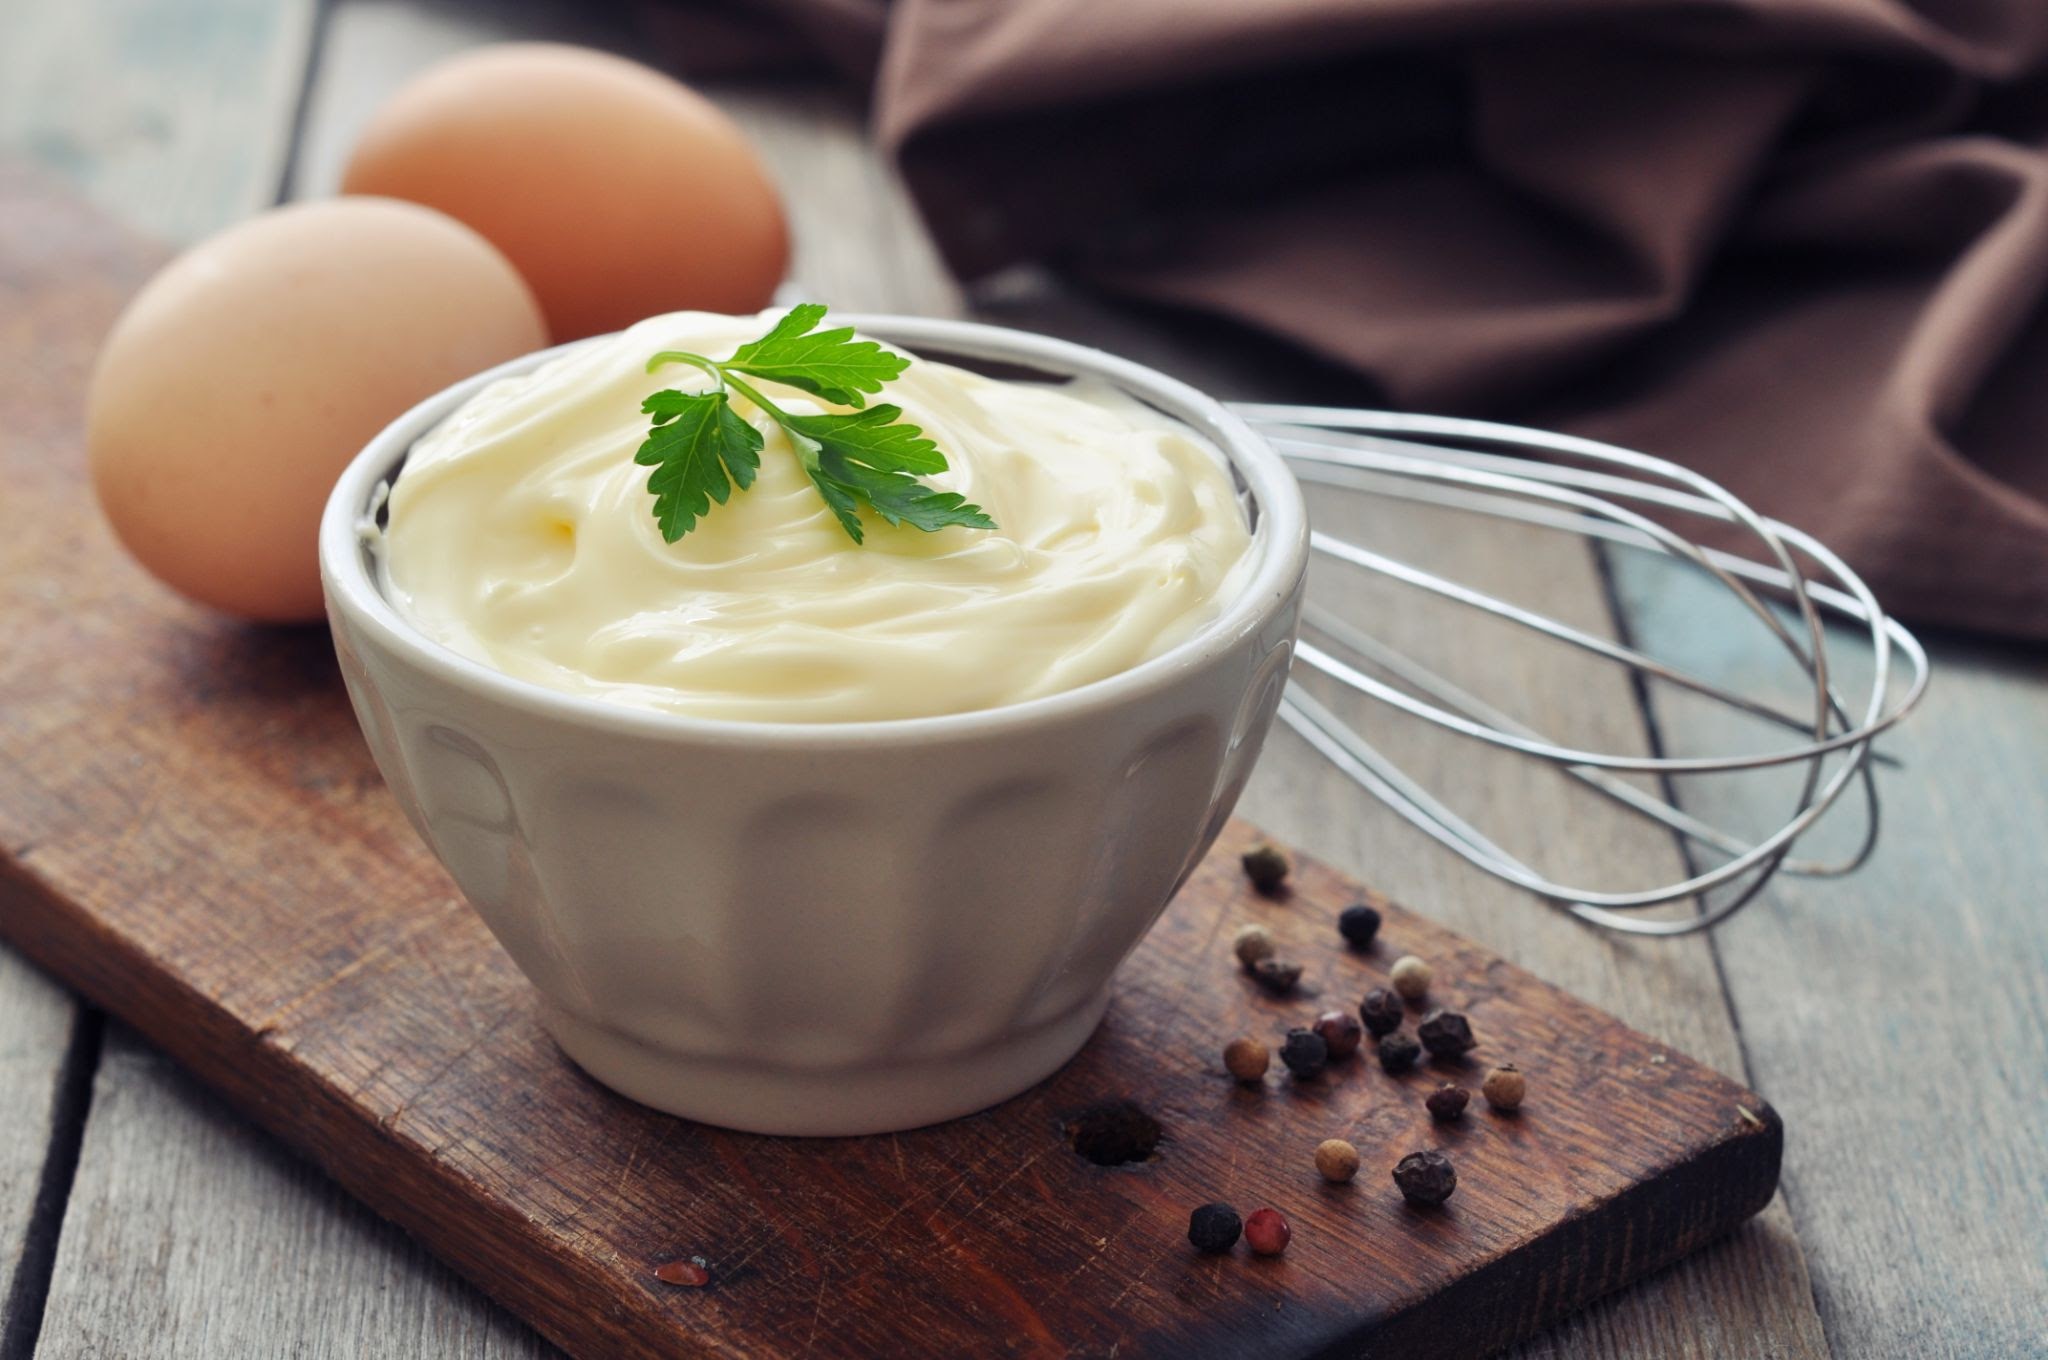 EGG MAYO — A REVERED FRENCH DISH